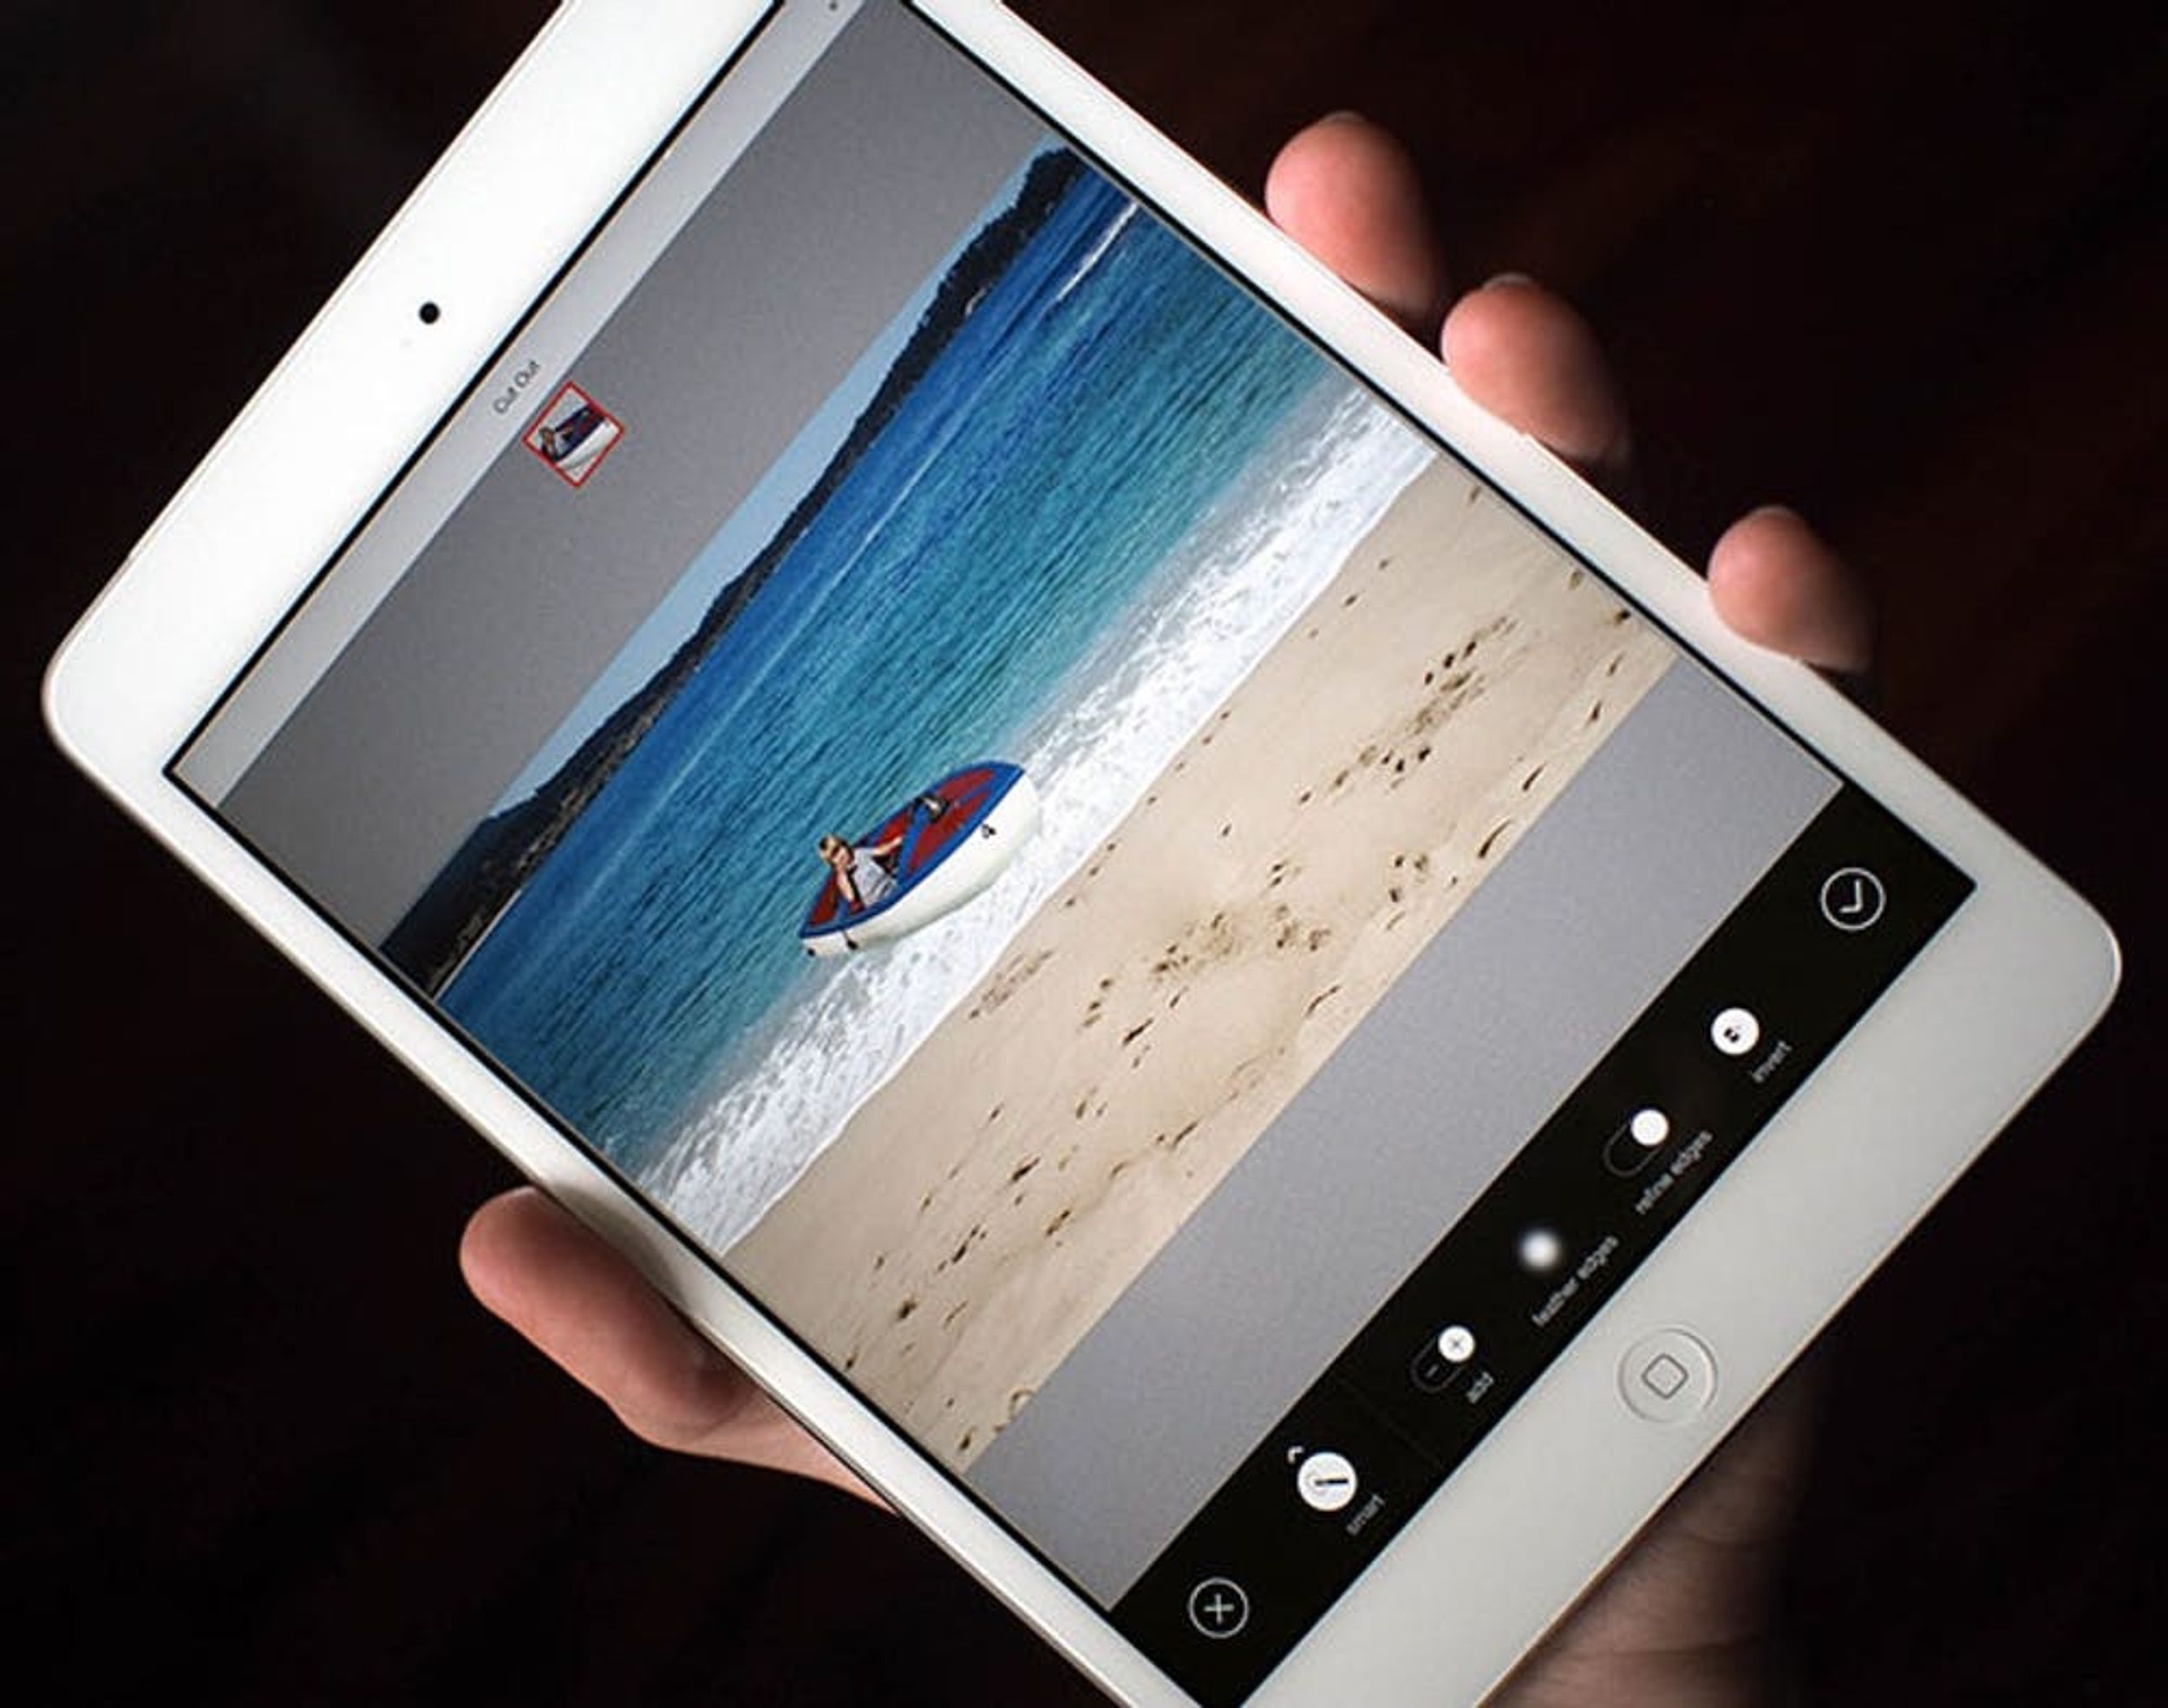 Are You a Photoshop Beginner? Then You’ll Love Adobe’s Newest App